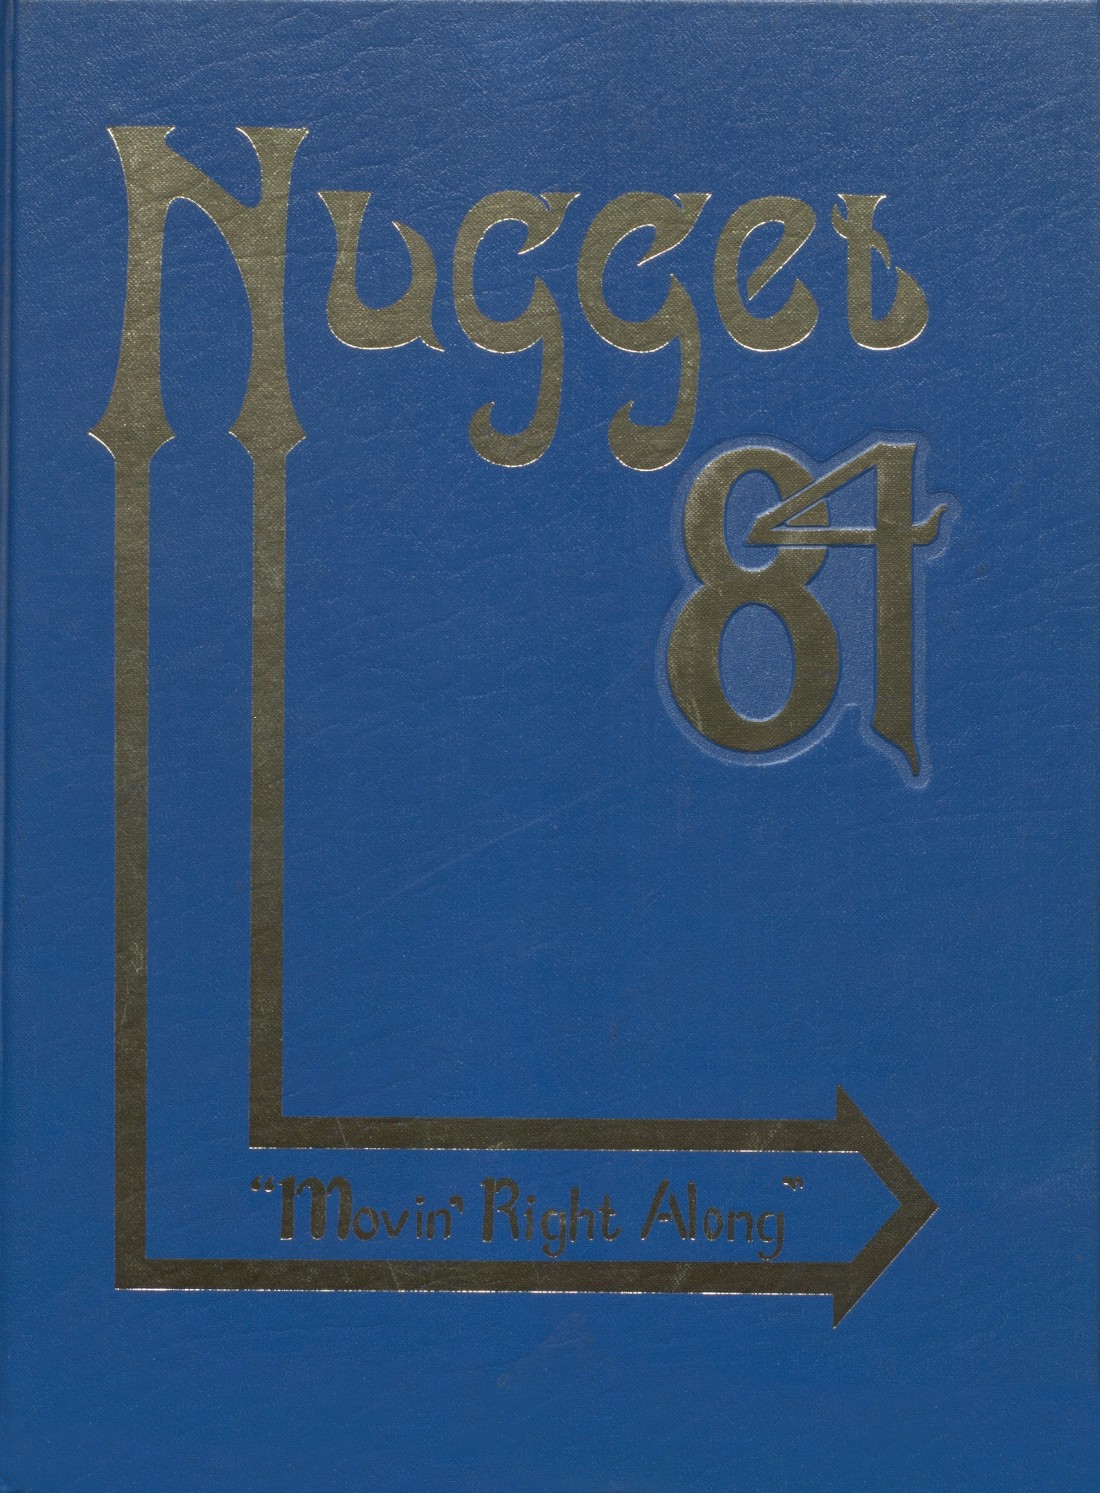 1984 yearbook from Butler High School from Butler, New Jersey